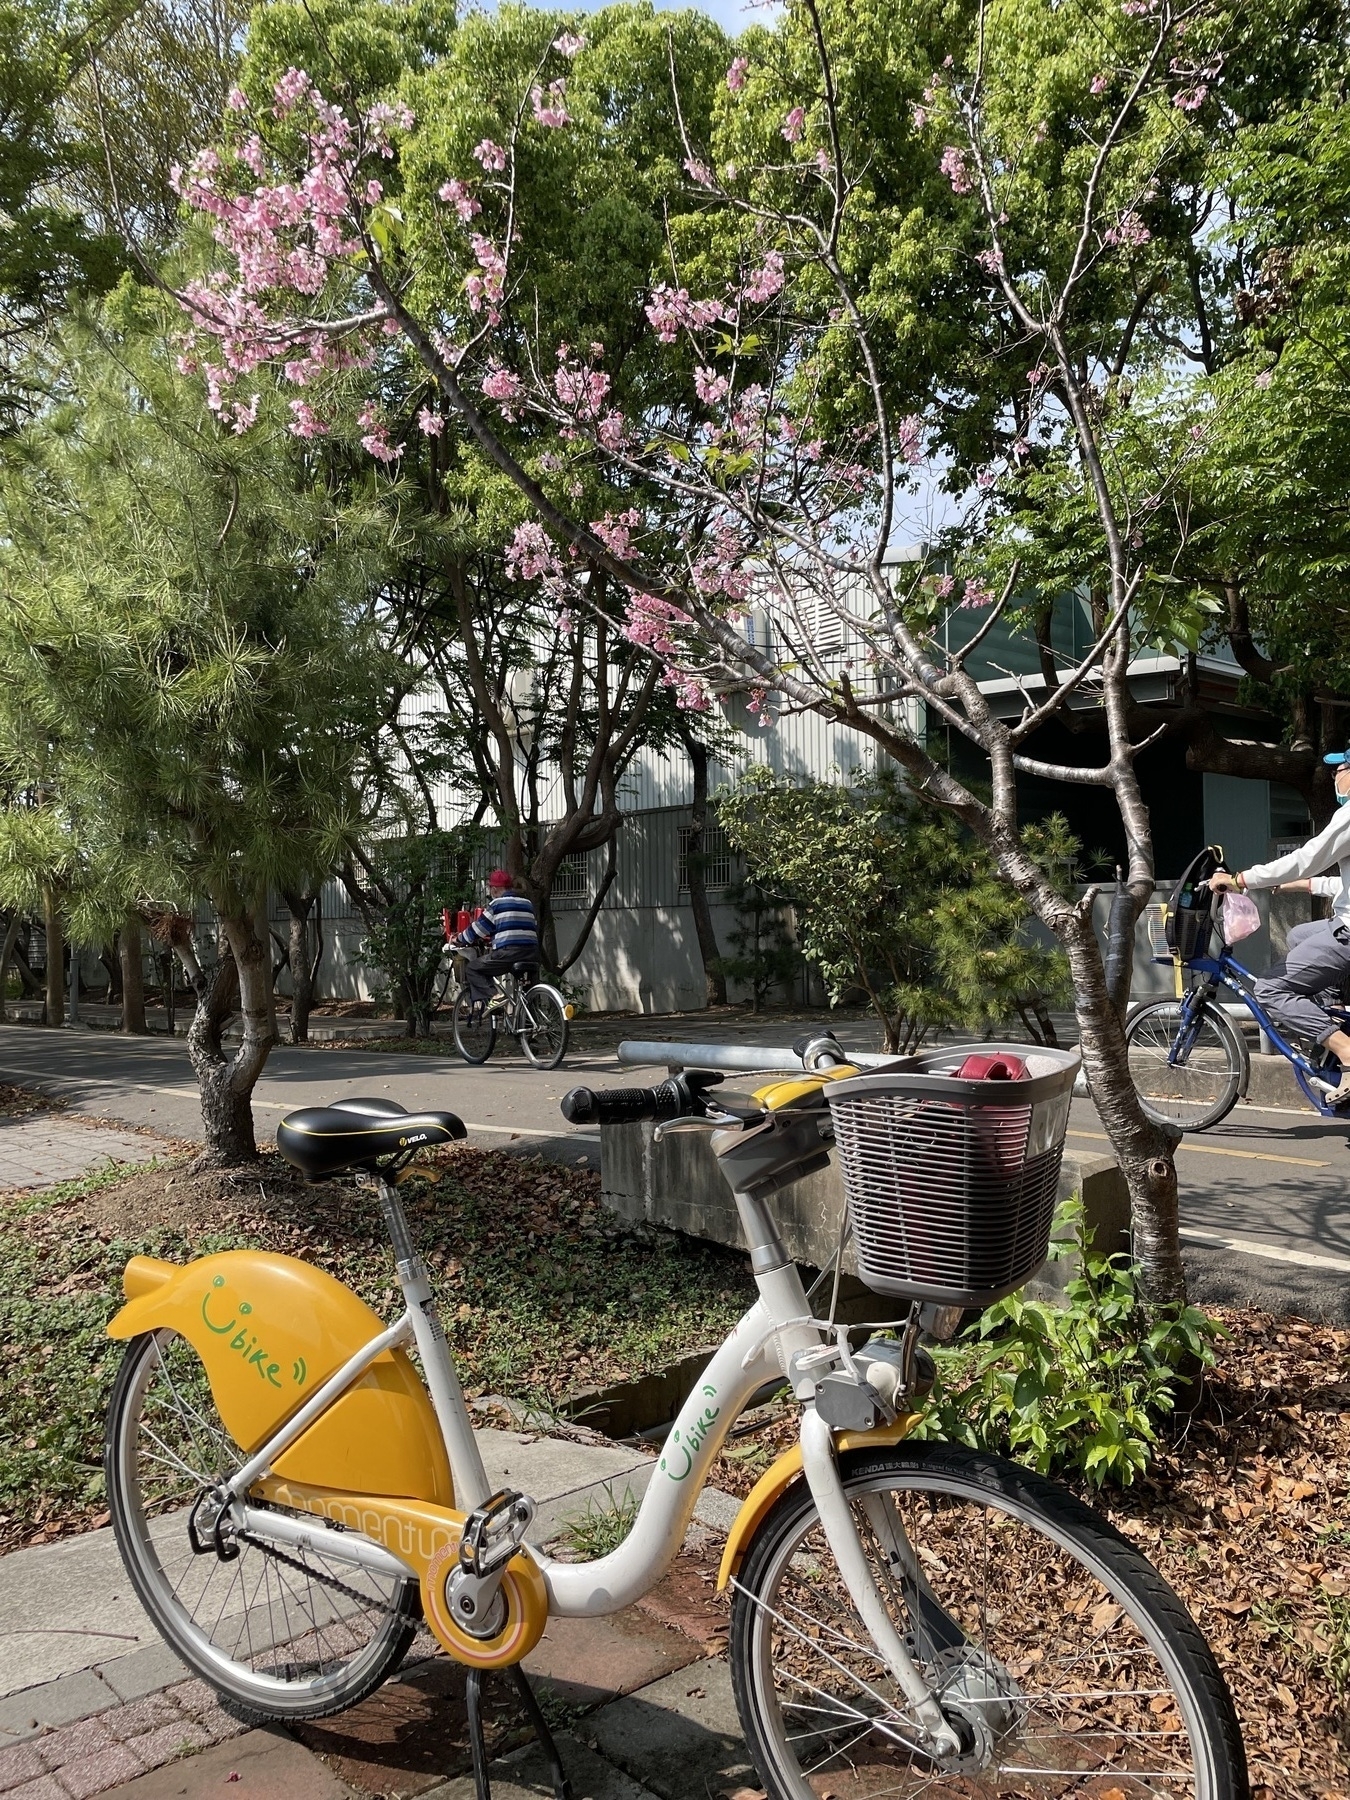 A YouBike parked under a cherry blossom tree. In the background, the Tanya Shen bikeway is visible with a few cyclists passing by.